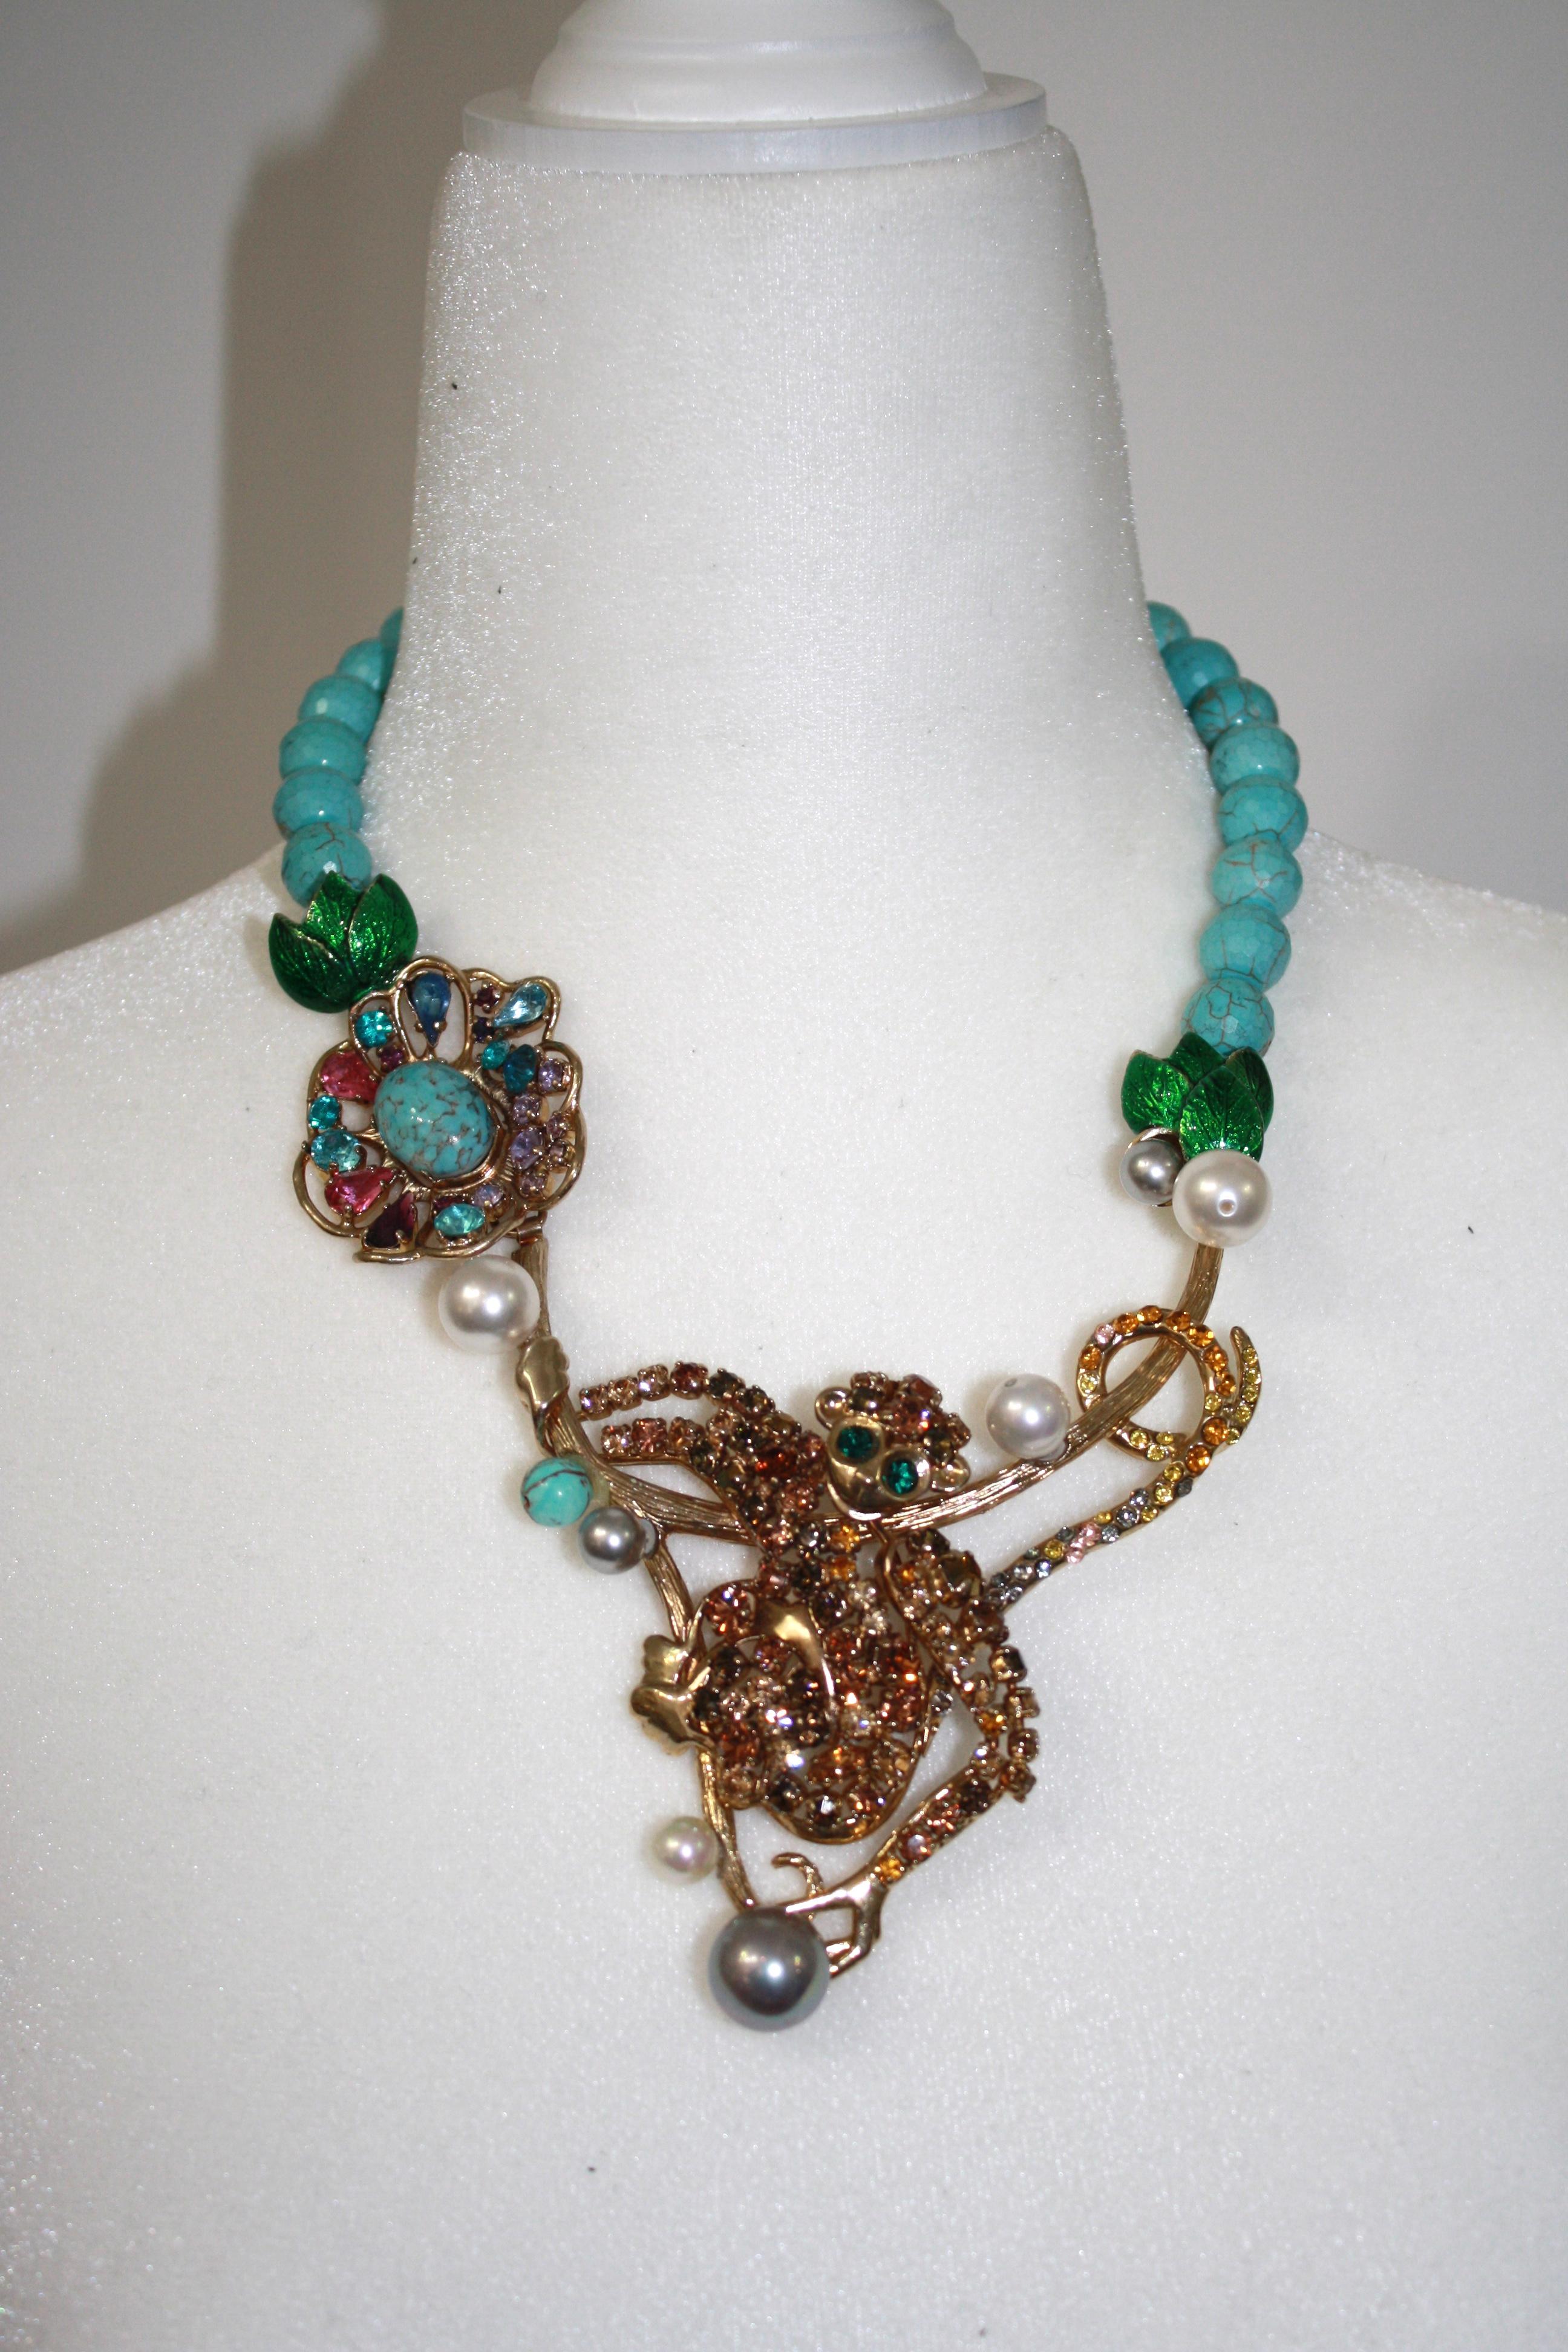 One of a kind necklace, a monkey with an articulated arm on gilded brass encrusted with Swarovski crystals. Turquoise beads and hand painted enamel motifs. 3